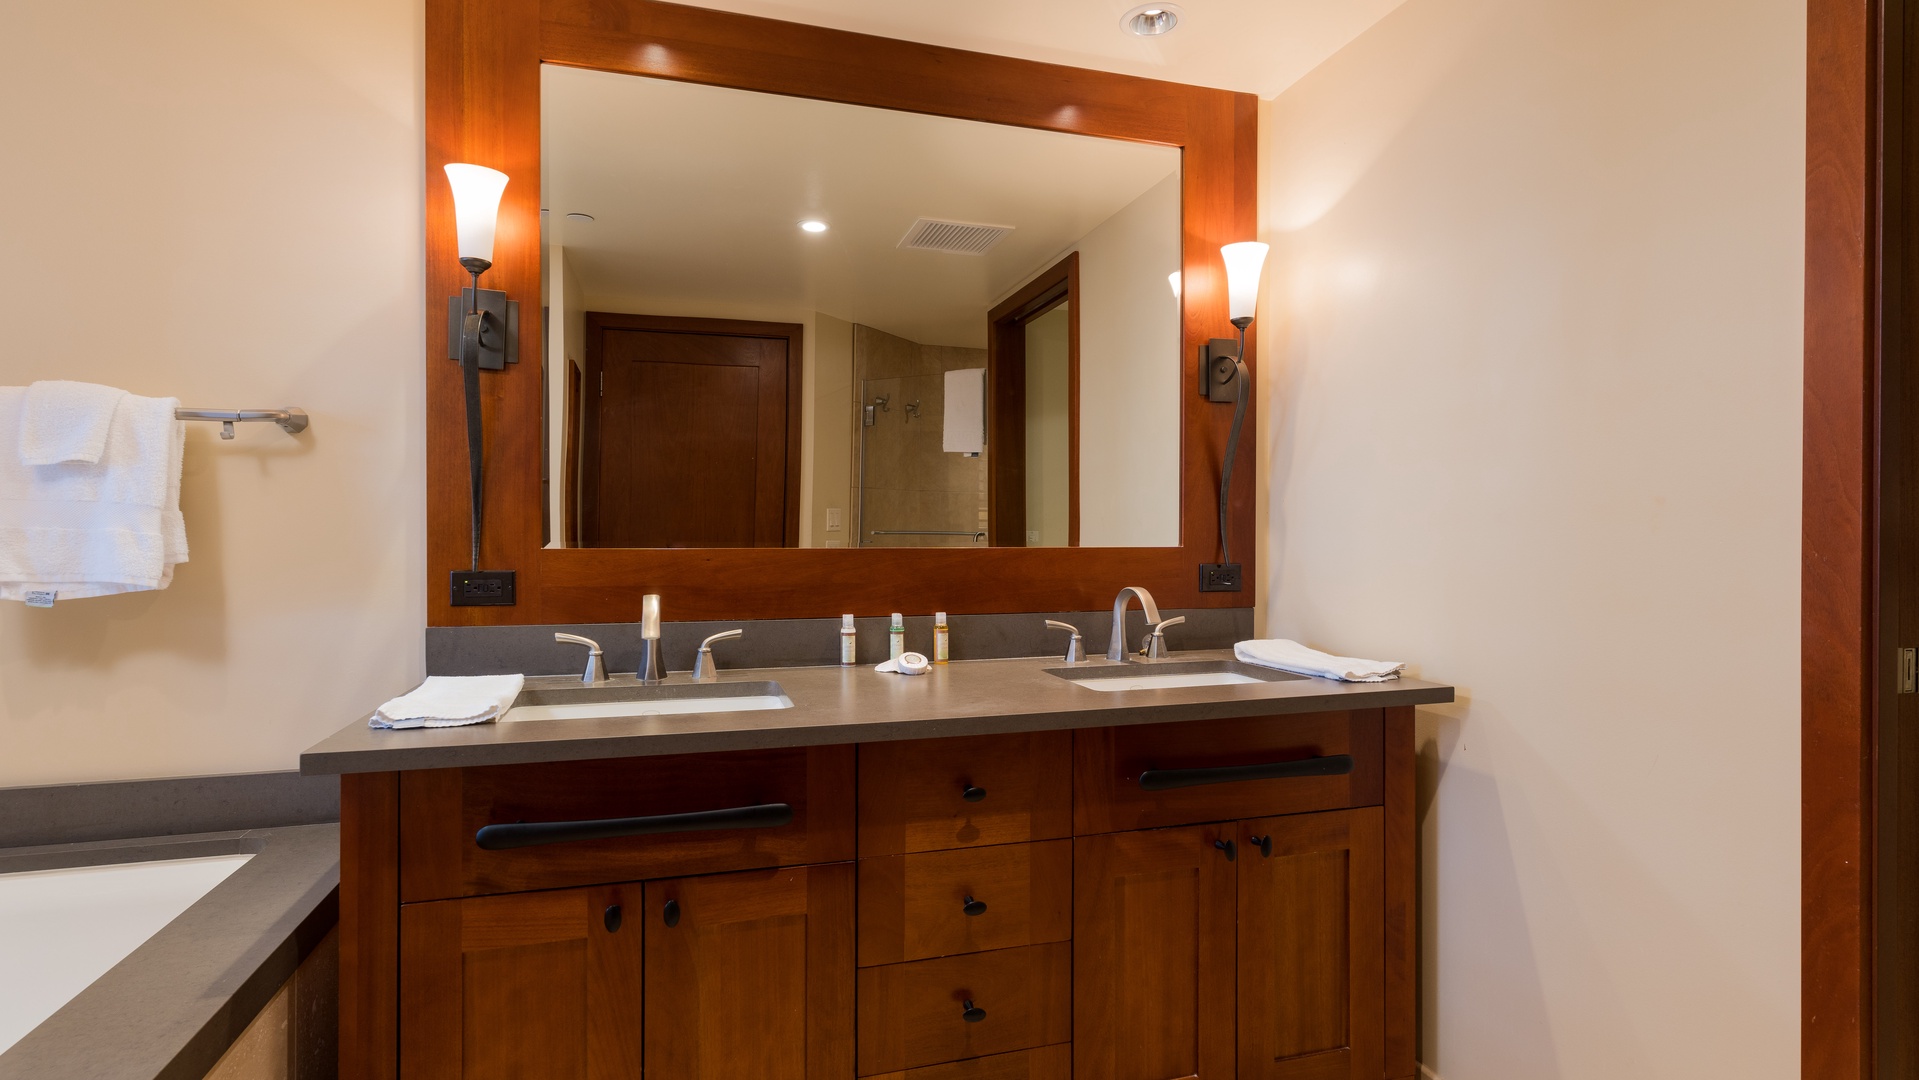 Kapolei Vacation Rentals, Ko Olina Beach Villas B310 - The primary guest bathroom with a double vanity and warm wood tones.